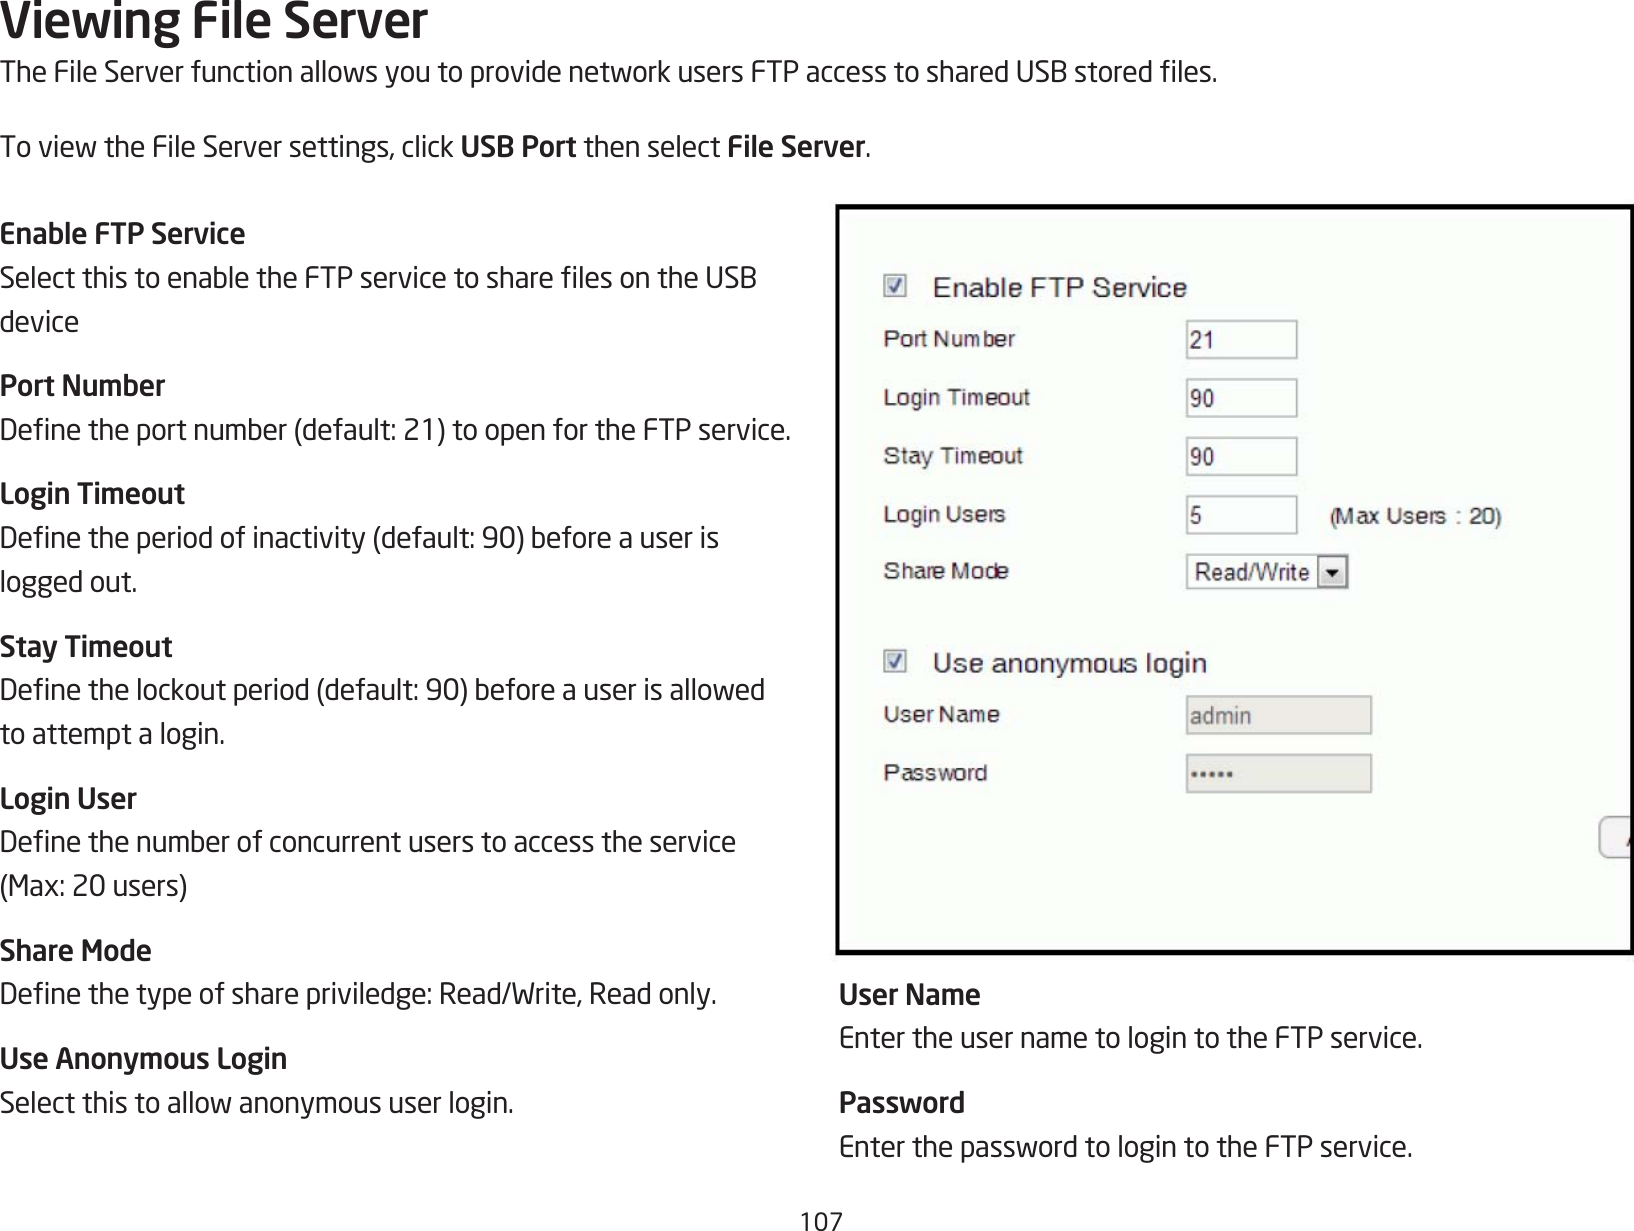 107Viewing File ServerTheFileServerfunctionallowsyoutoprovidenetworkusersFTPaccesstosharedUSBstoredles.ToviewtheFileServersettings,clickUSB Port then select File Server.Enable FTP ServiceSelectthistoenabletheFTPservicetosharelesontheUSBdevicePort NumberDenetheportnumber(default:21)toopenfortheFTPservice.Login TimeoutDenetheperiodofinactivity(default:90)beforeauserislogged out.Stay TimeoutDenethelockoutperiod(default:90)beforeauserisallowedto attempt a login.Login UserDenethenumberofconcurrentuserstoaccesstheservice(Max:20users)Share ModeDenethetypeofsharepriviledge:Read/Write,Readonly.Use Anonymous LoginSelectthistoallowanonymoususerlogin.User NameEnter the user name to login to the FTP service.PasswordEnterthepasswordtologintotheFTPservice.